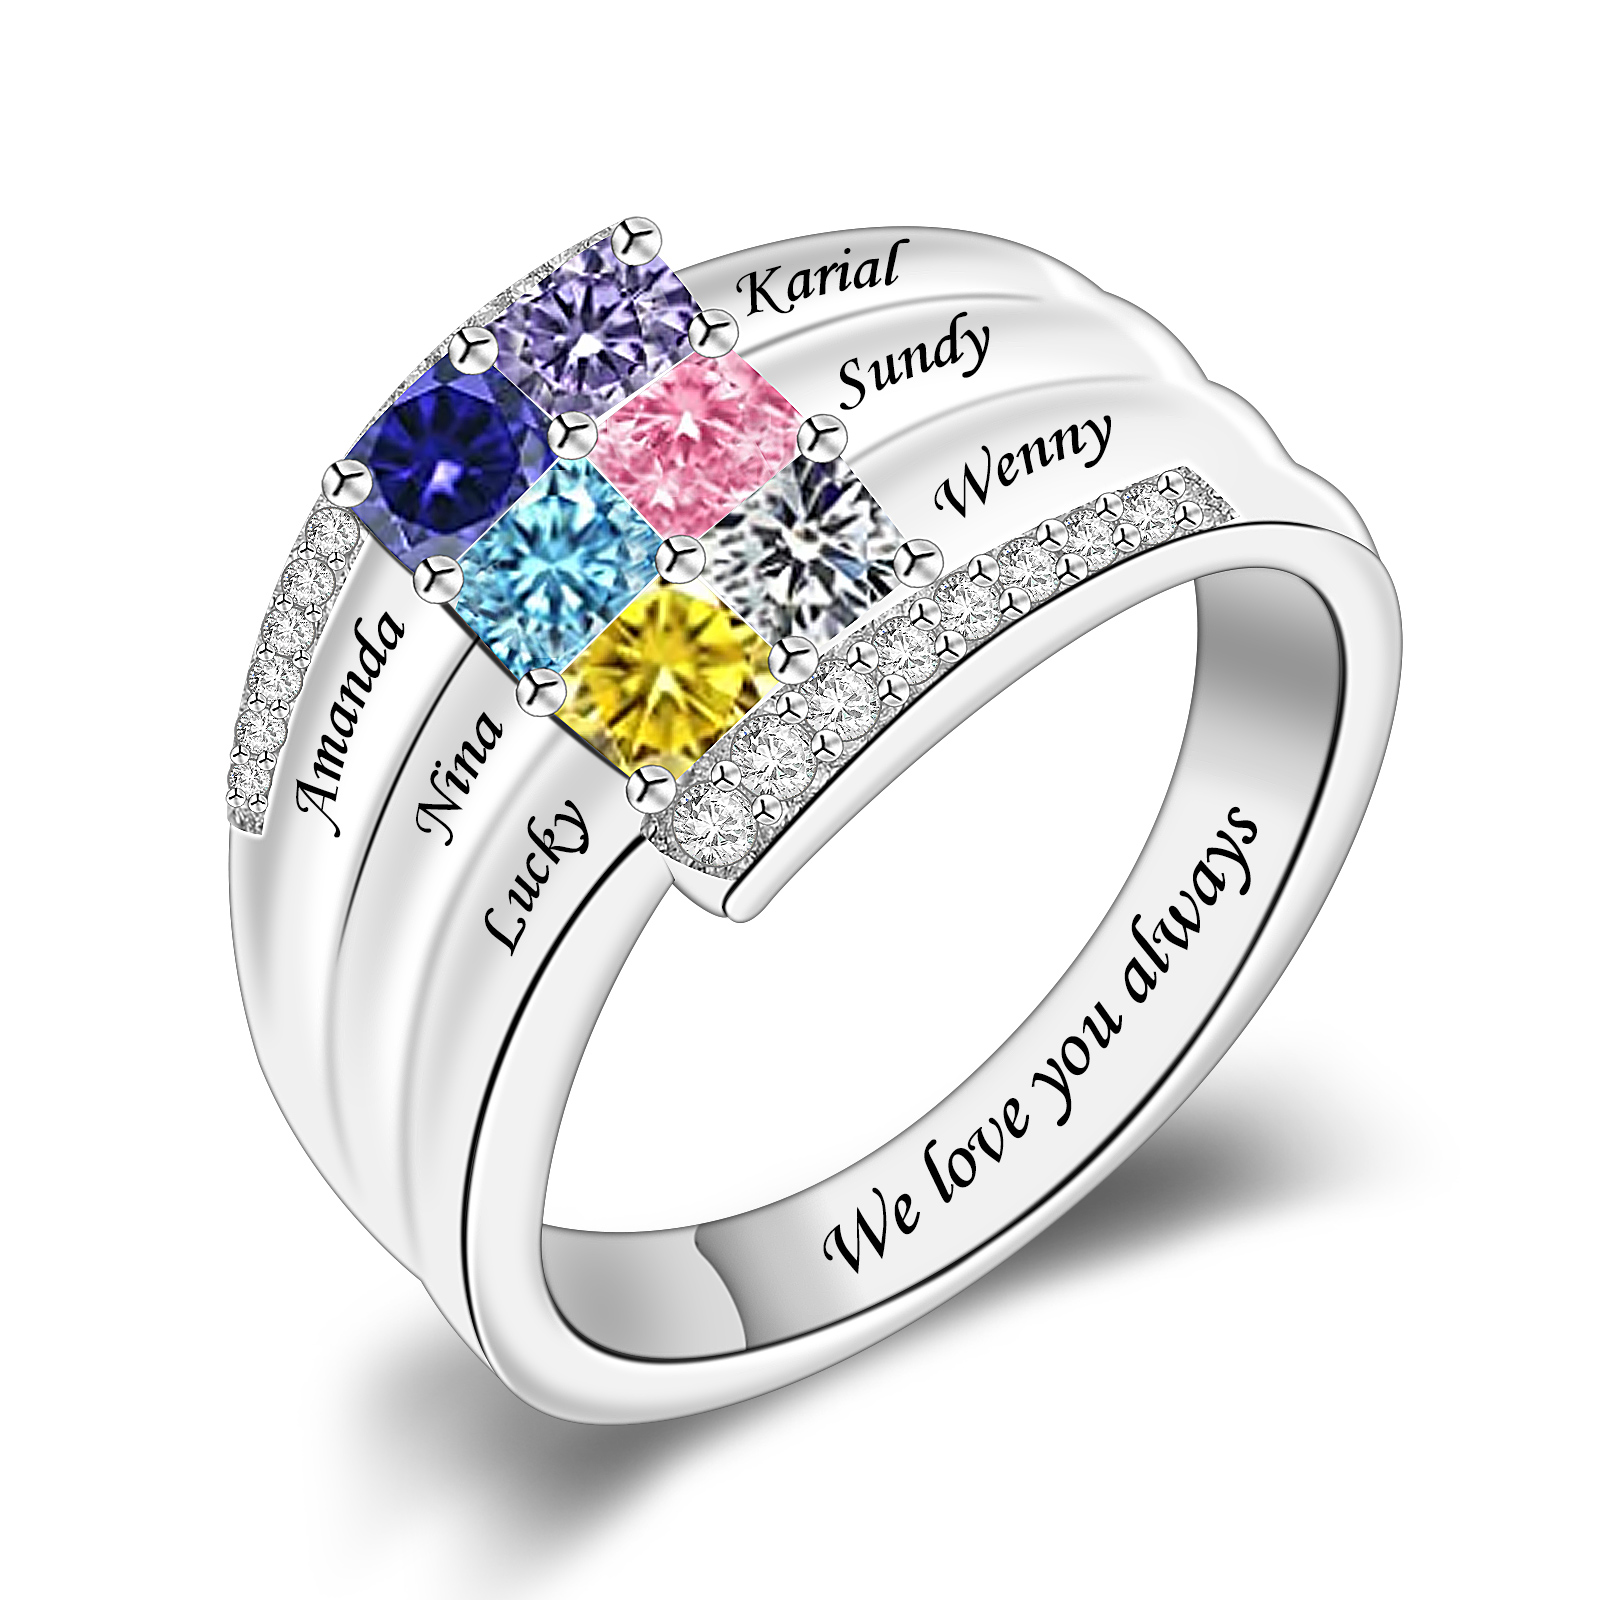 R5-1-6 Personalized Mothers Ring Birthstone and Engraved Name (1-9 Stones)